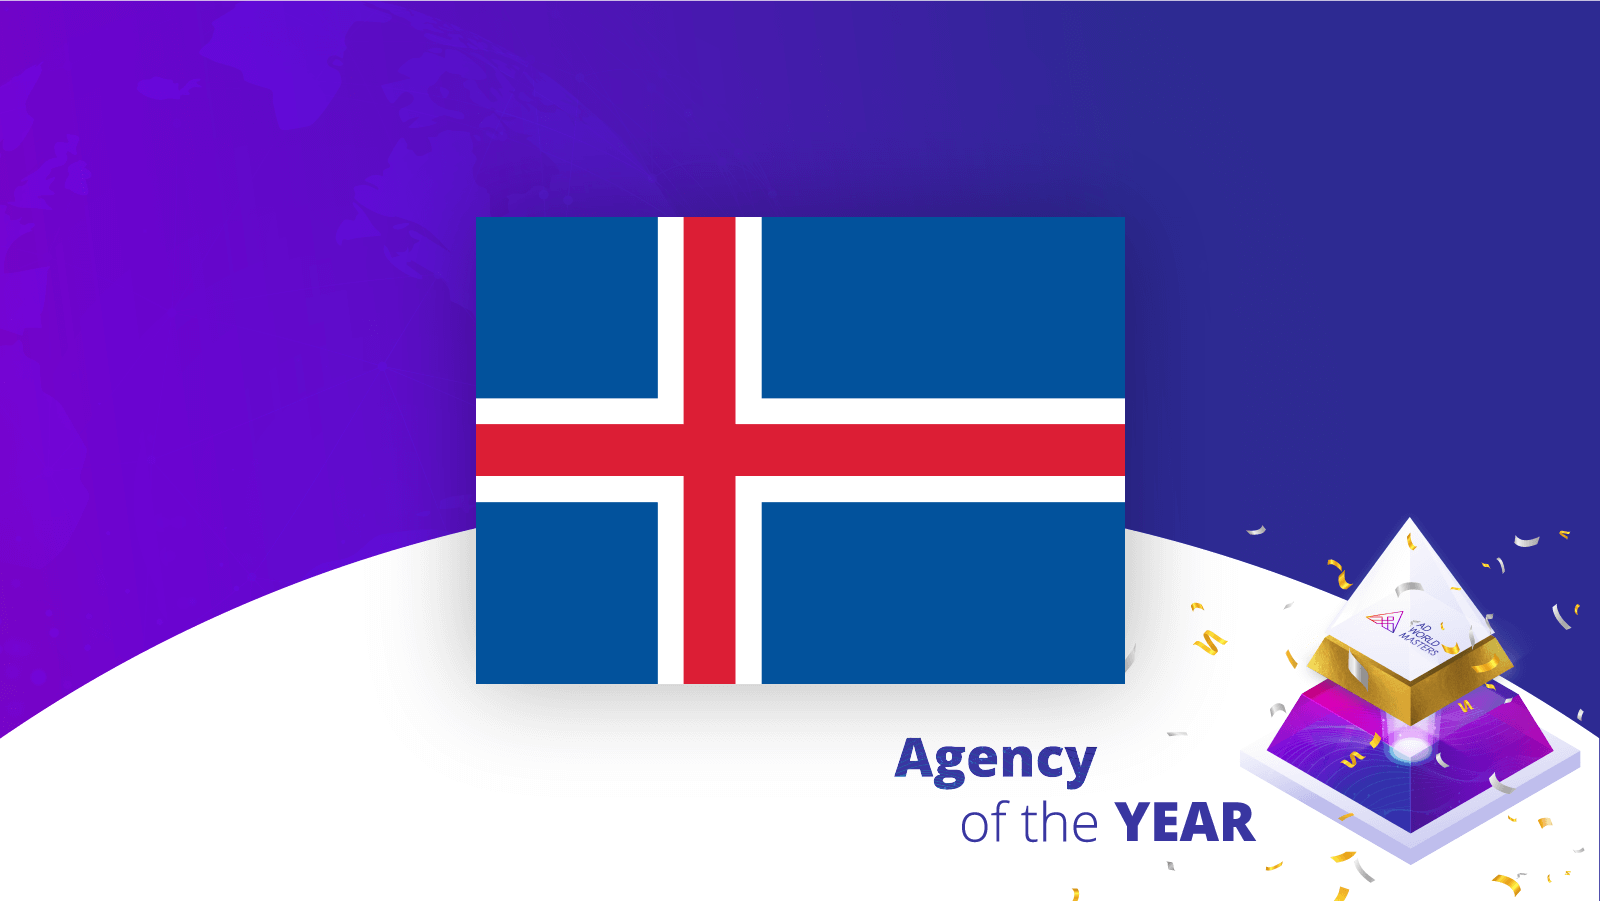 Agencies of the Year Iceland